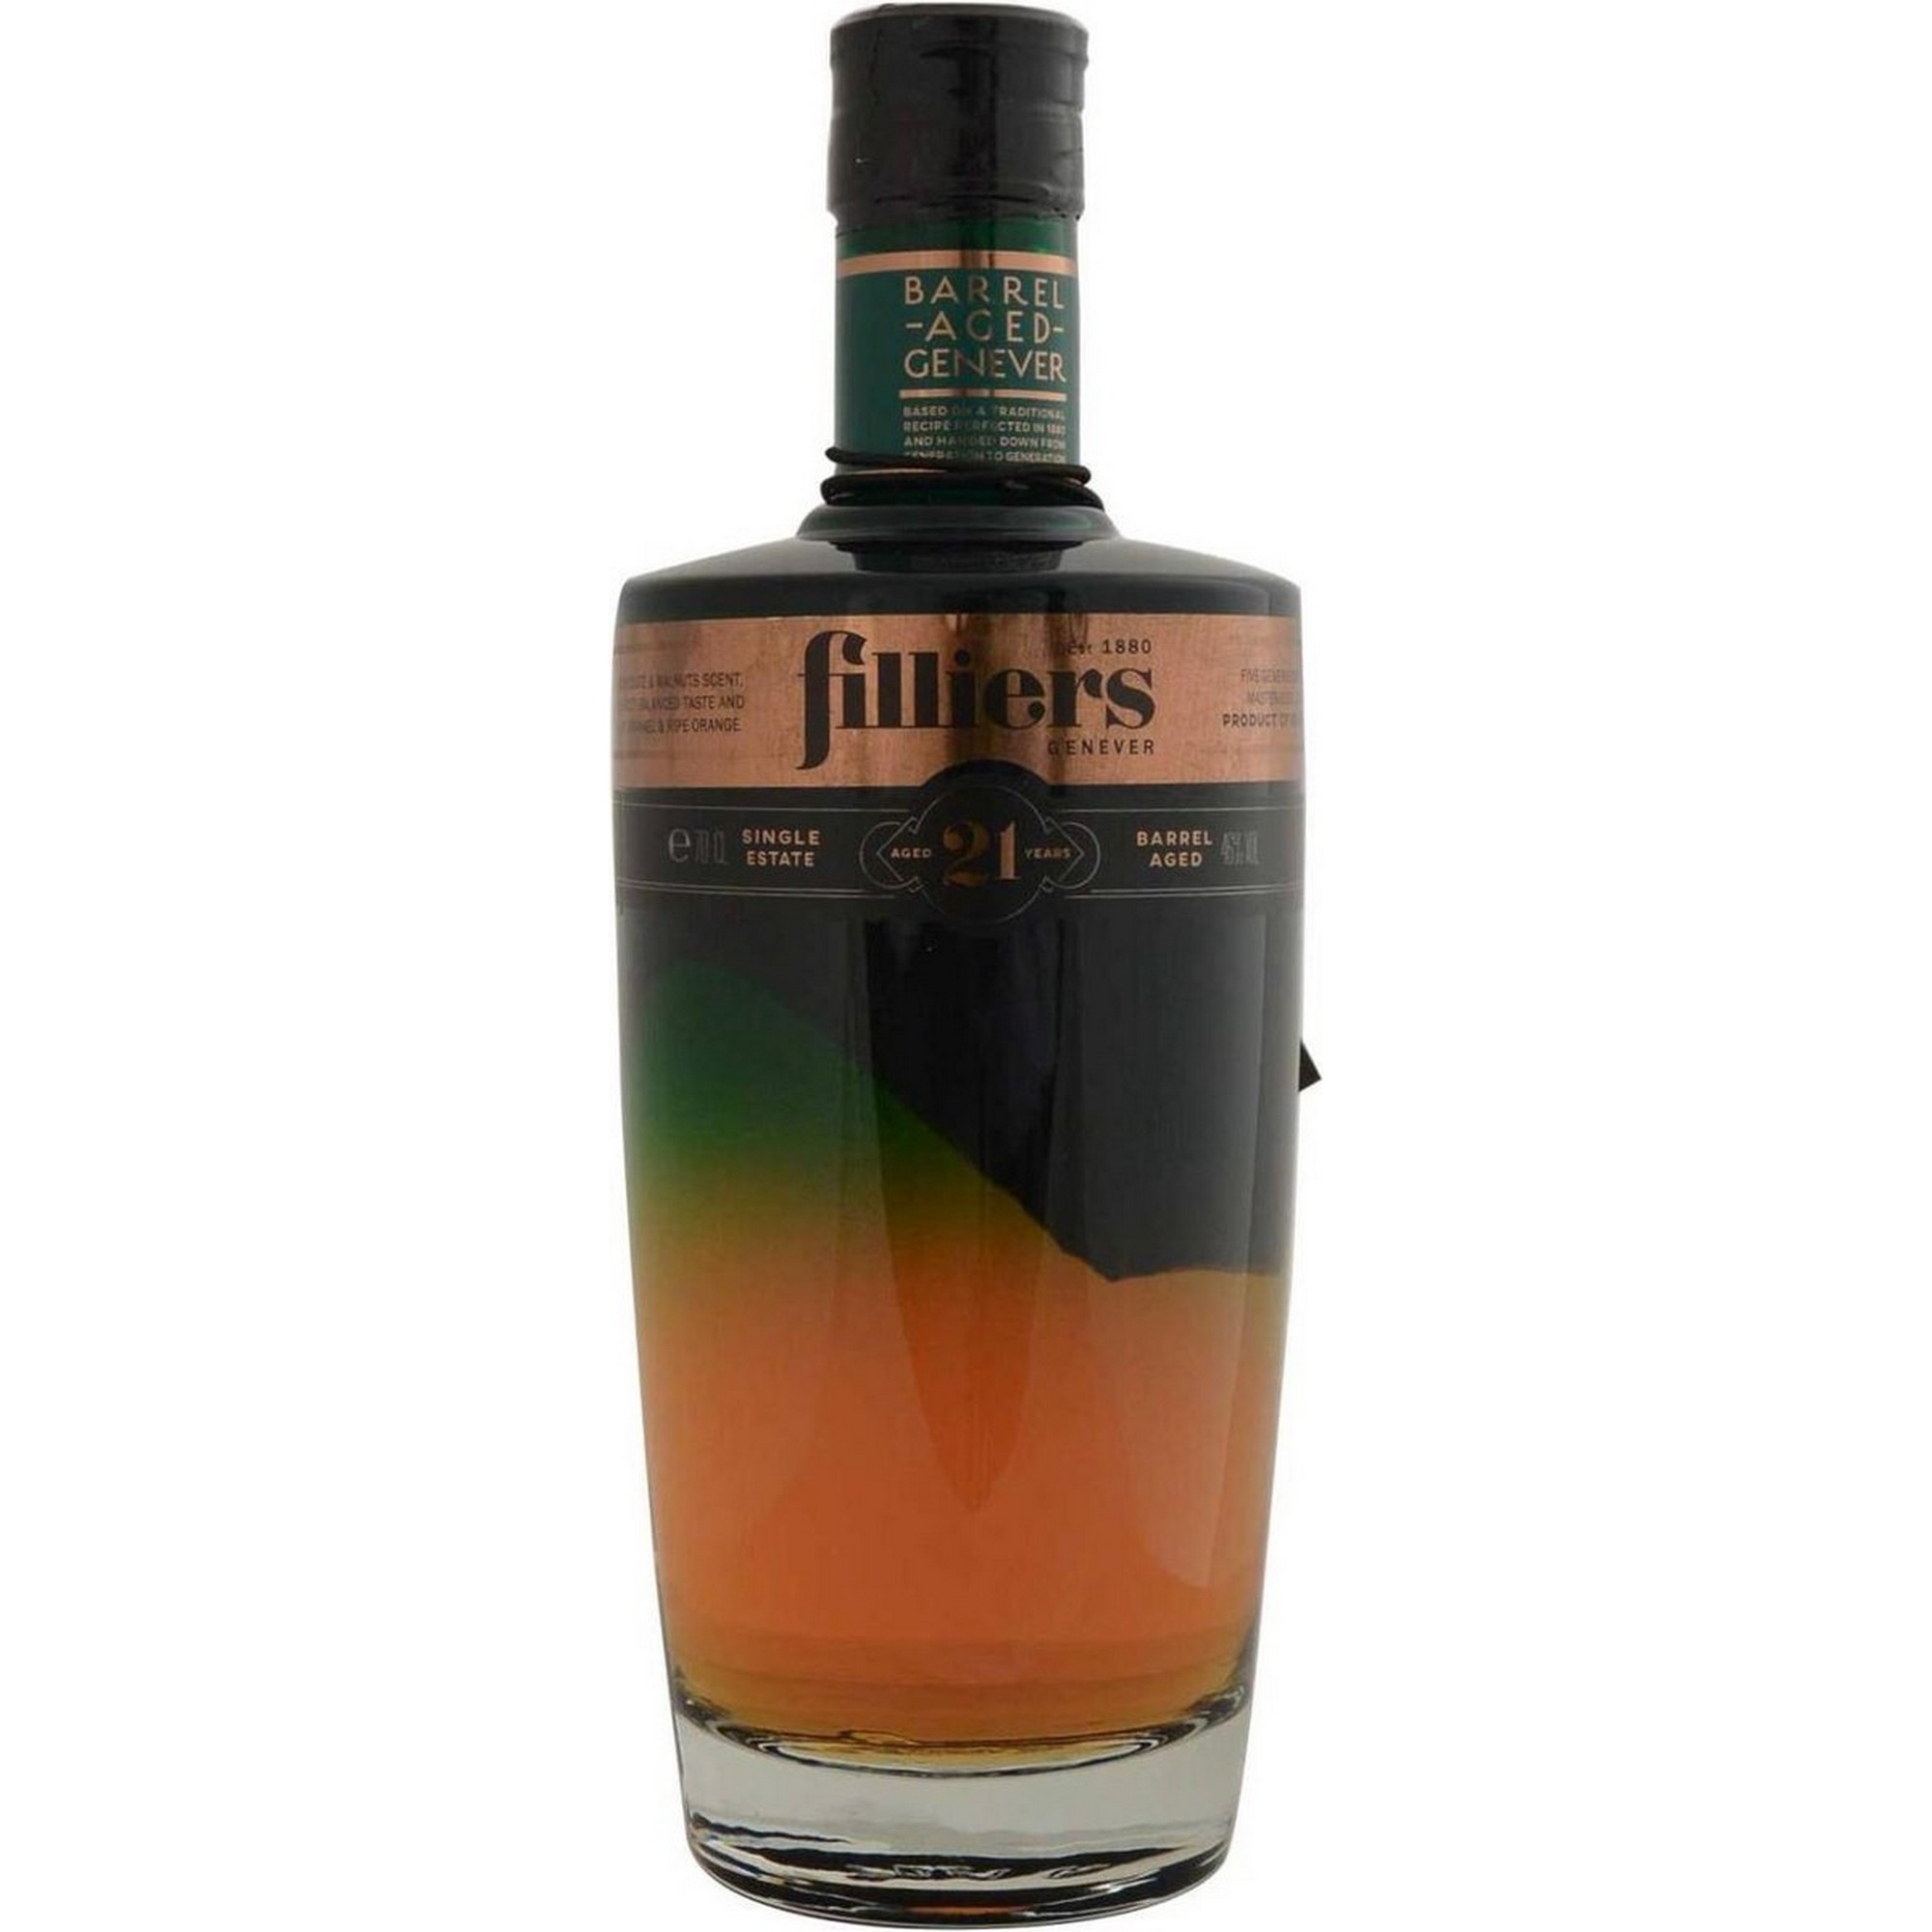 Filliers Barrel Aged 21 Years